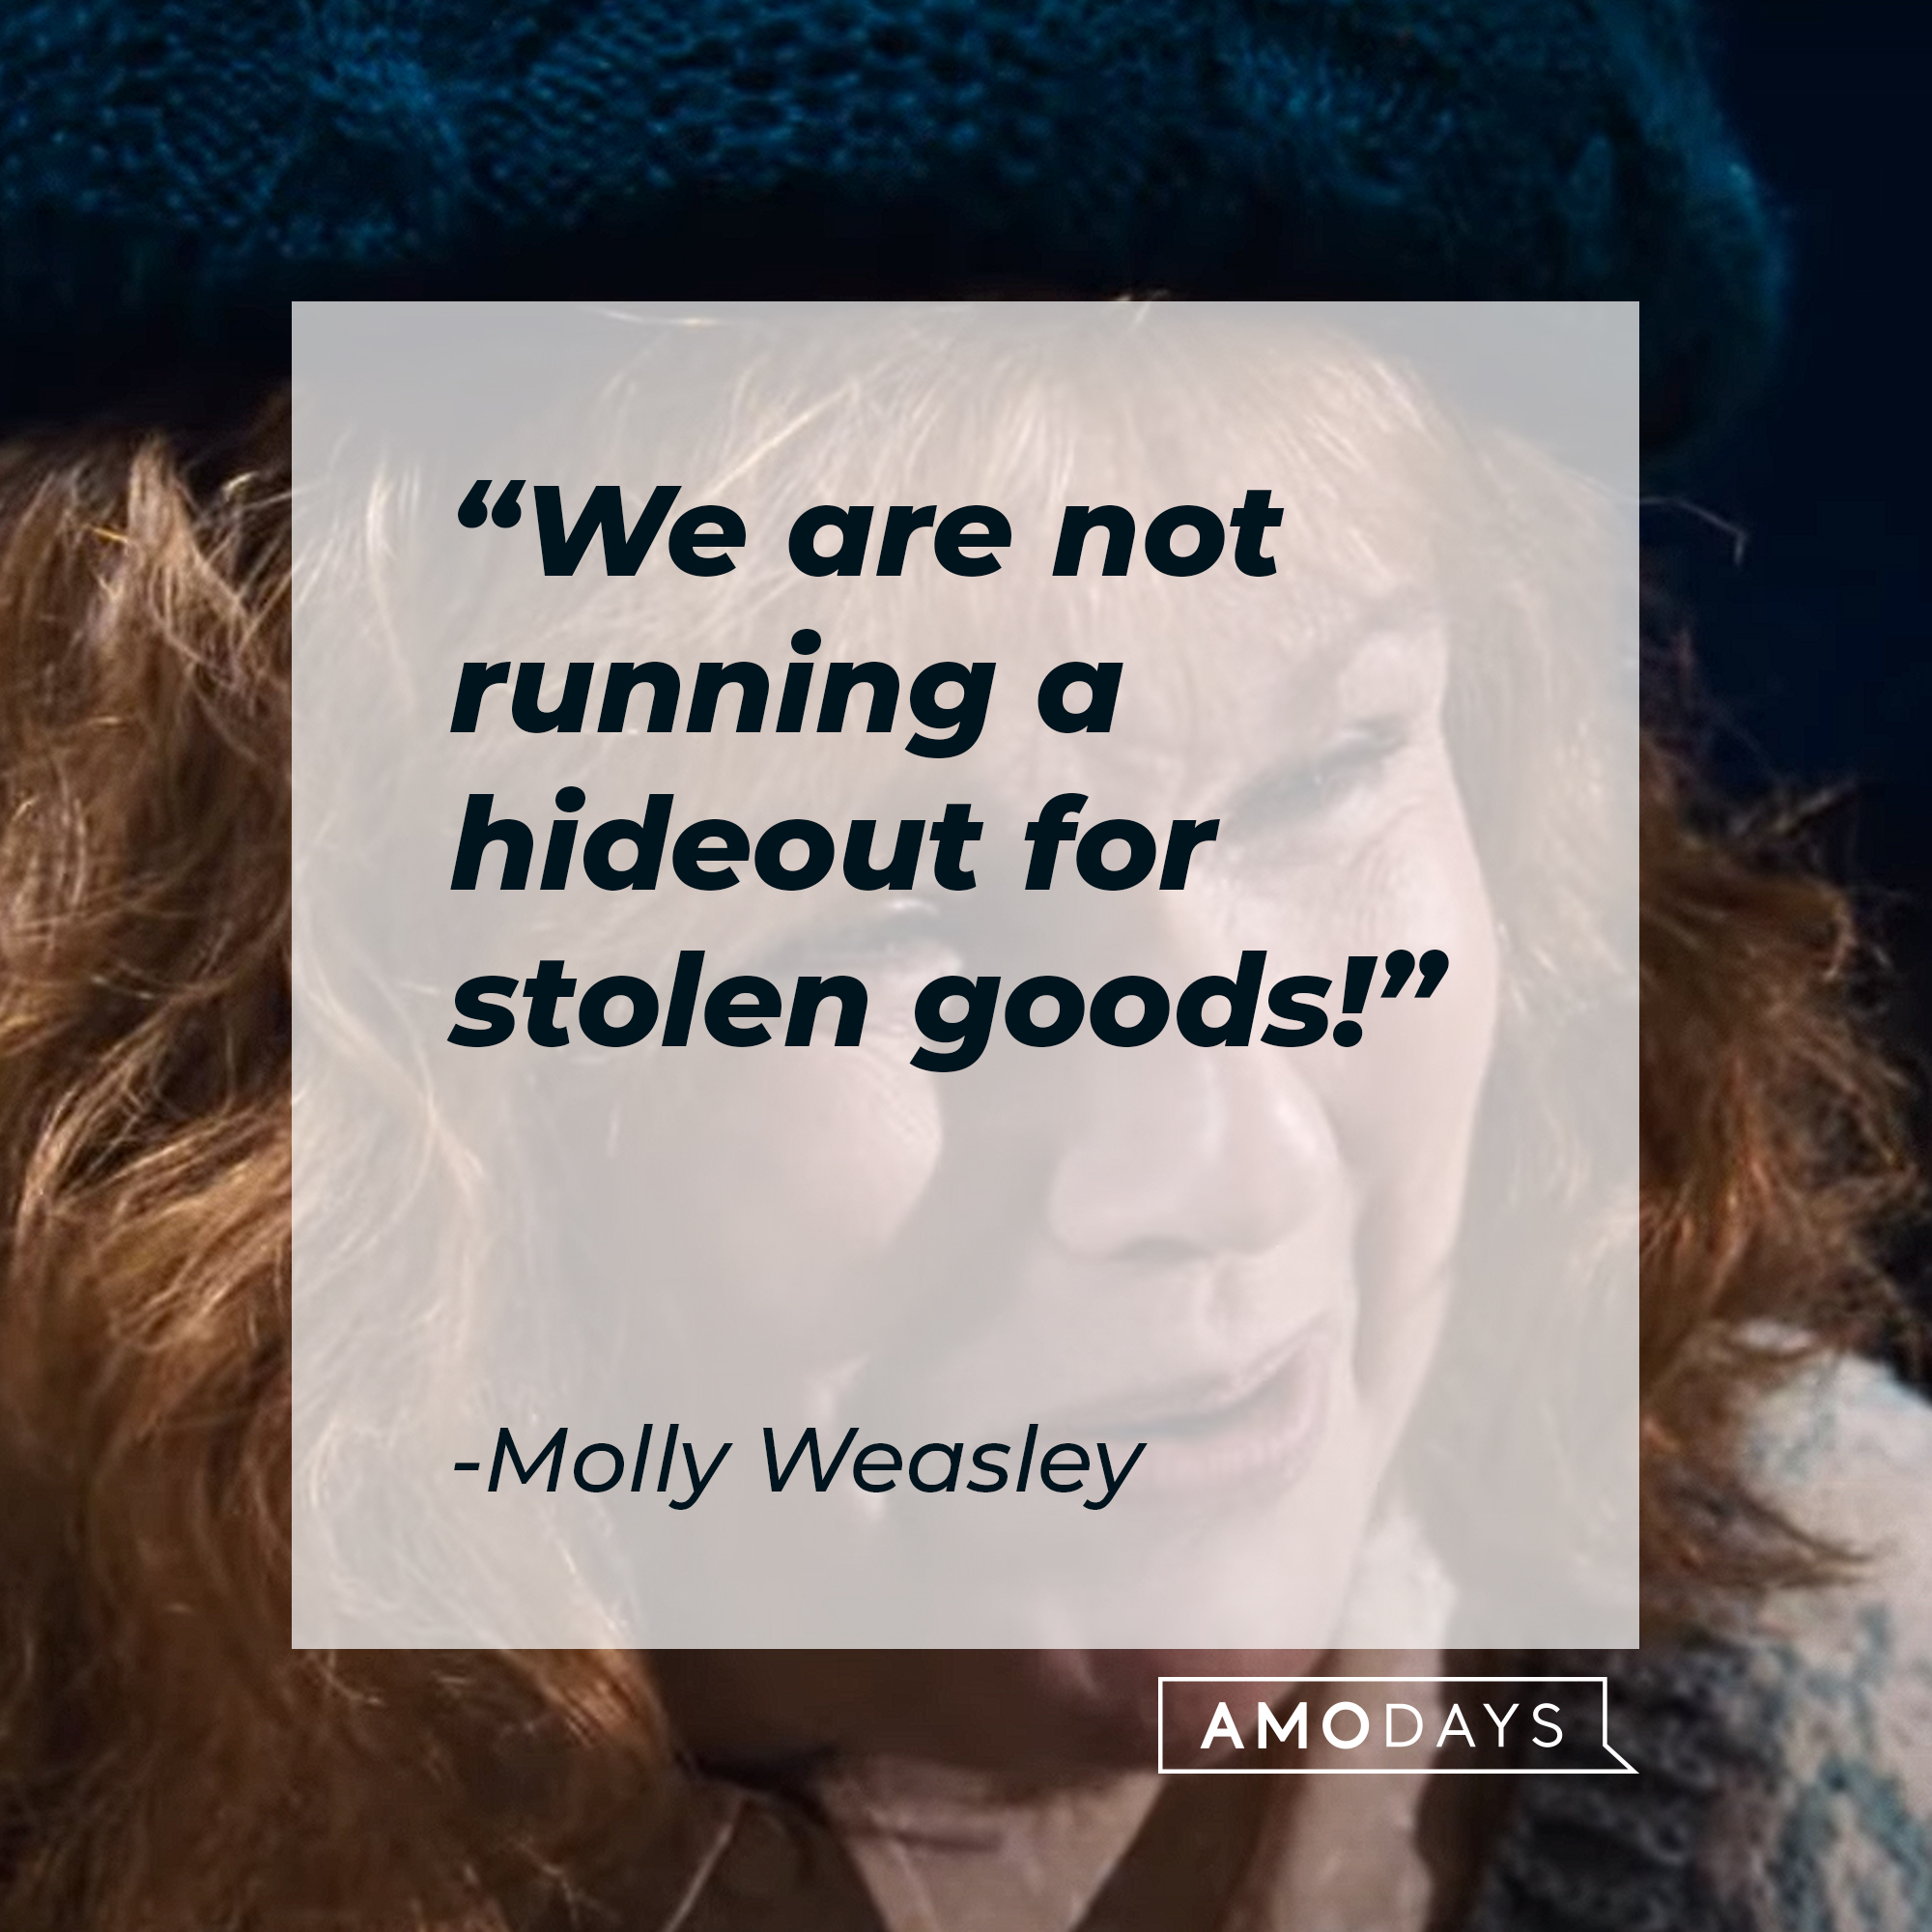 Molly Weasley's quote: "We are not running a hideout for stolen goods!" | Source: Youtube.com/harrypotter